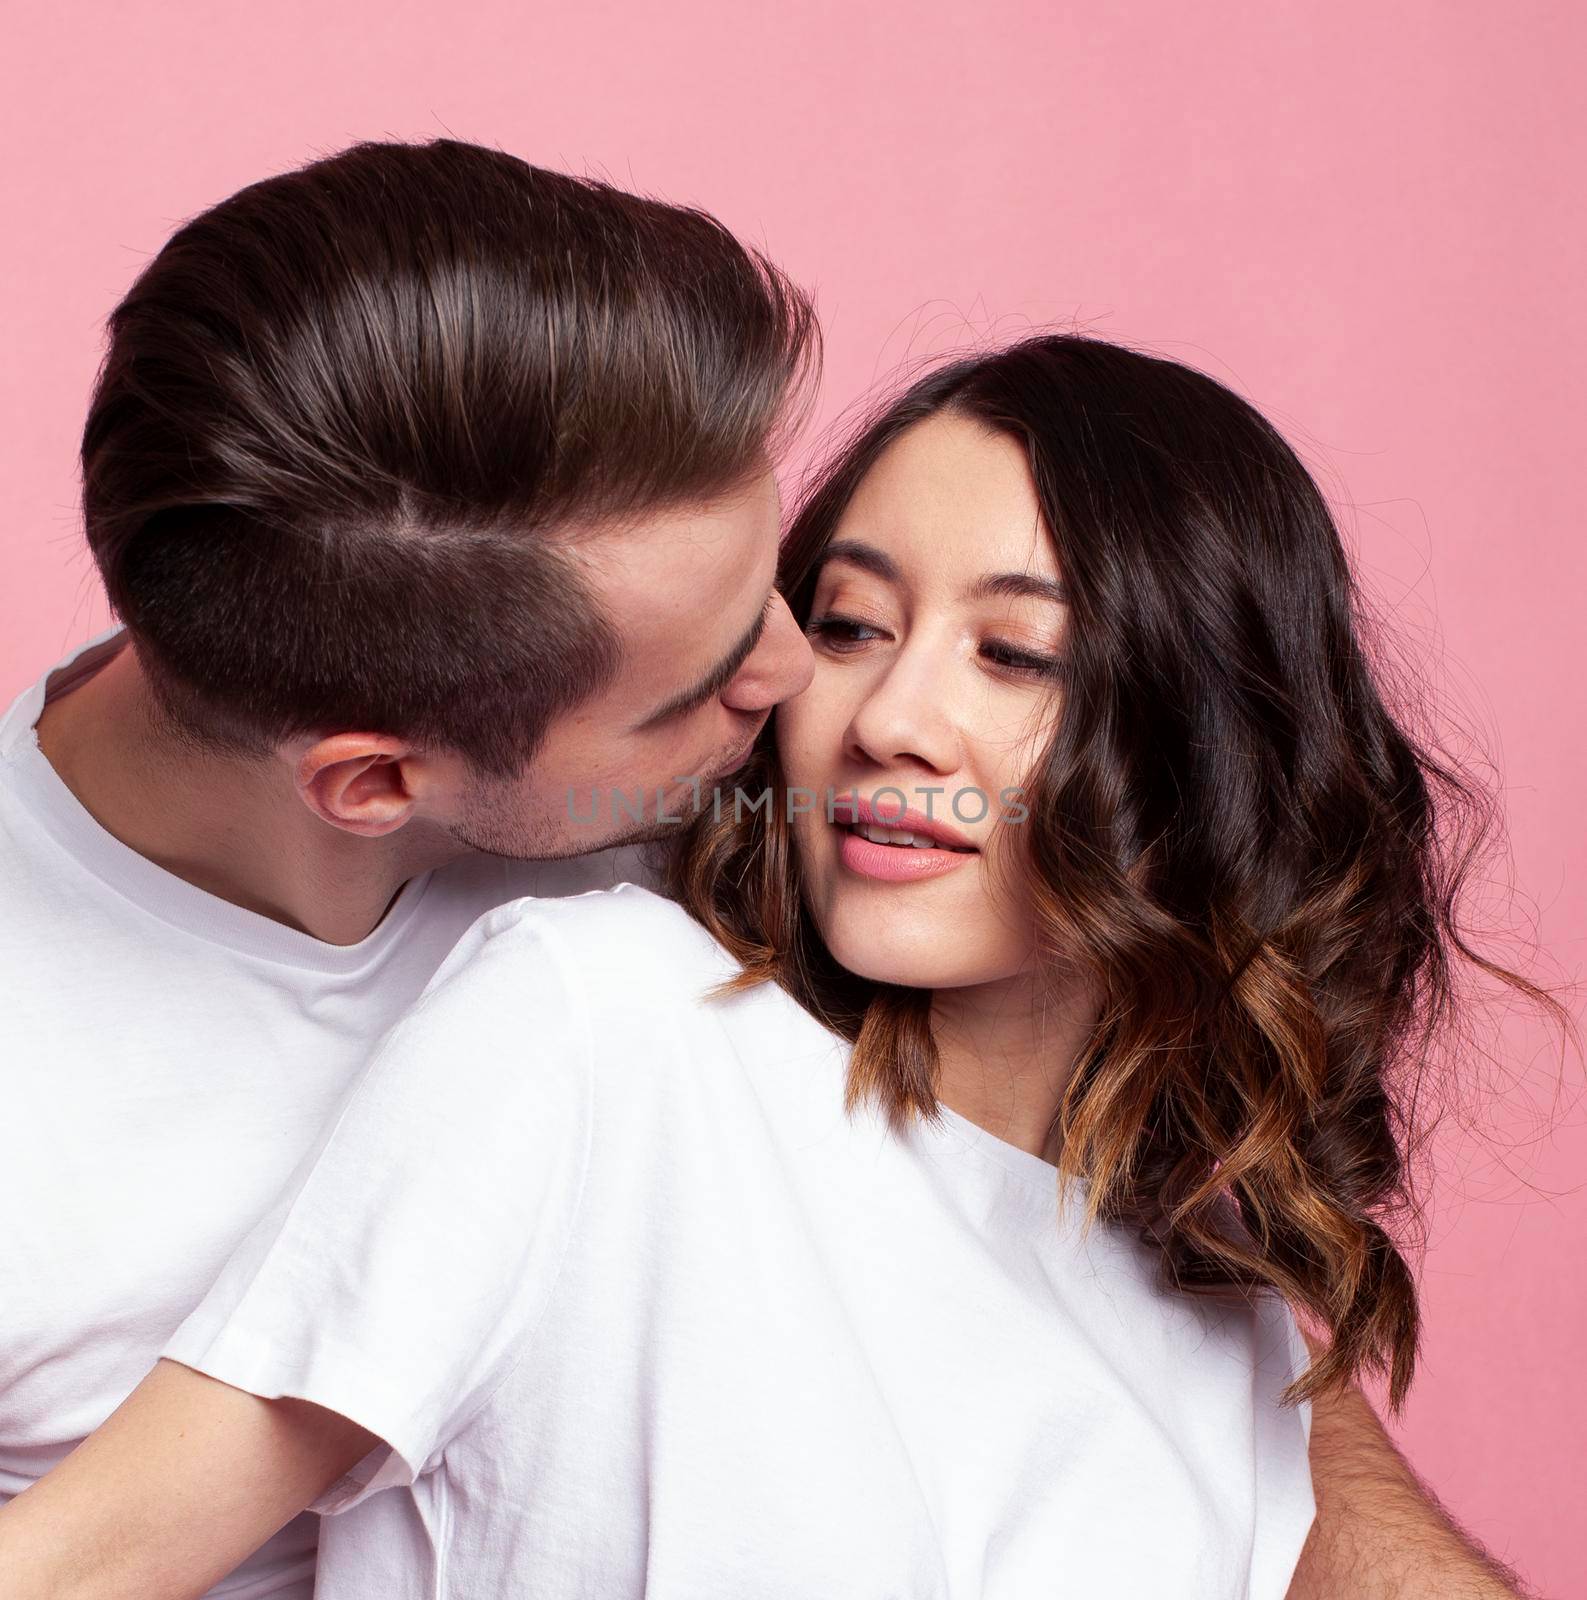 young cheerful caucasian couple together having fun on pink background, guy ang girl modern relationship, lifestyle people concept close up